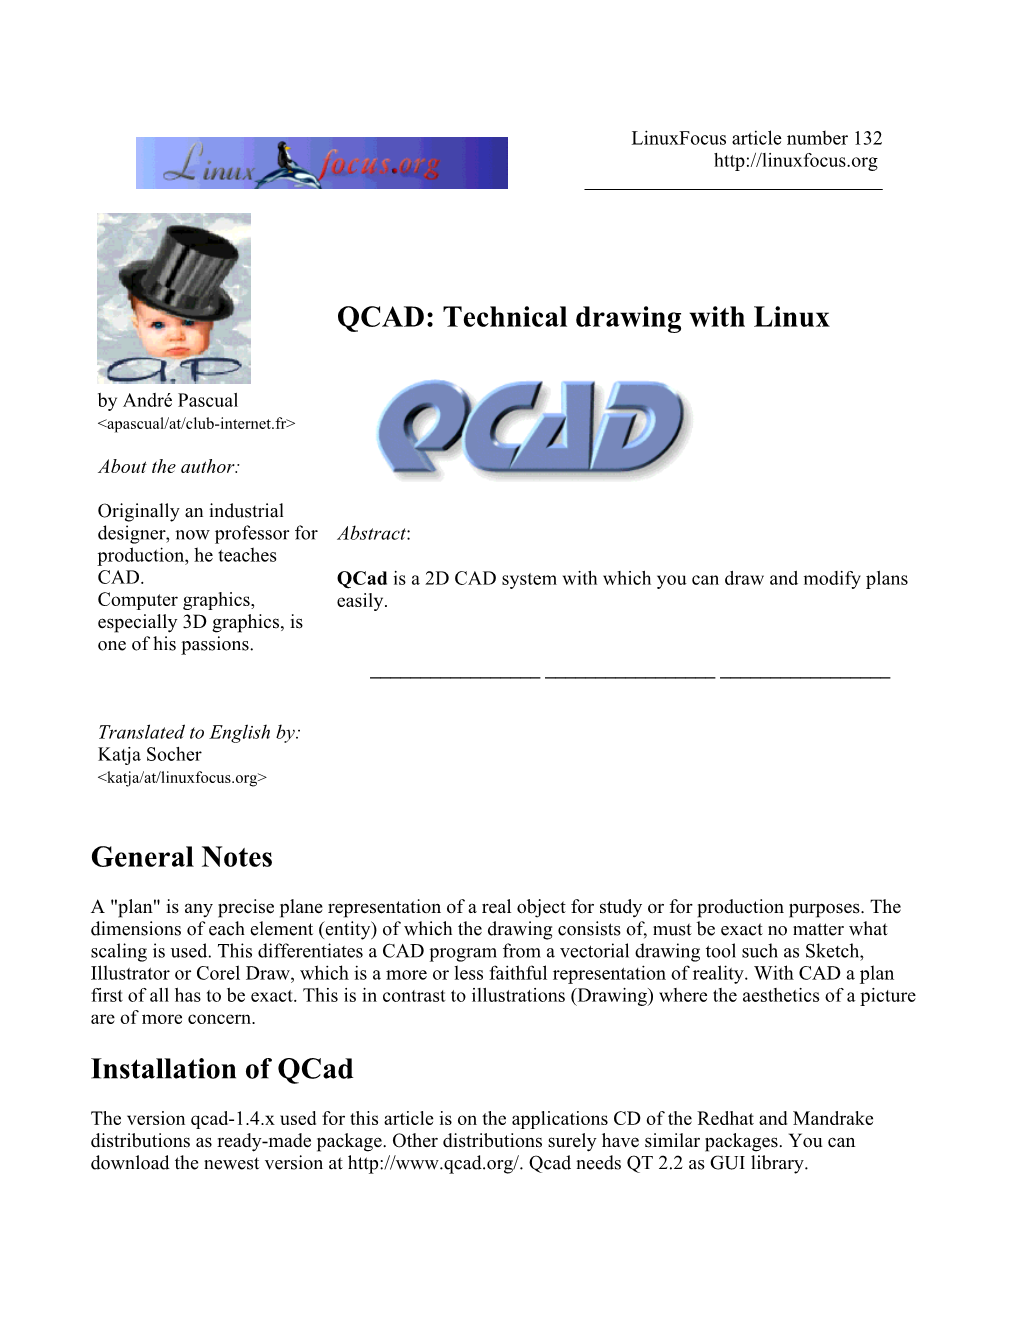 QCAD: Technical Drawing with Linux General Notes Installation of Qcad